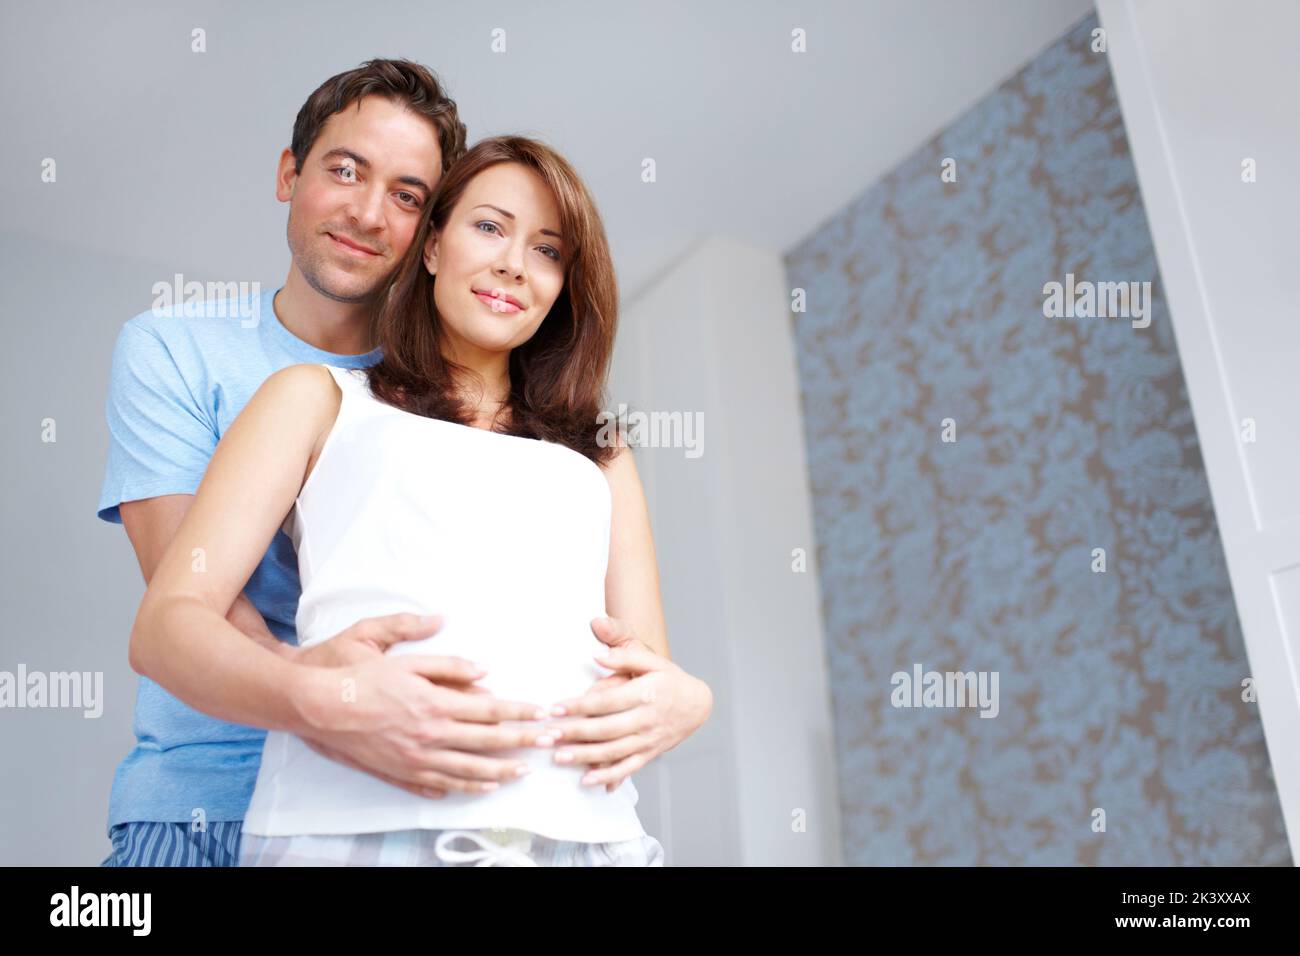 Committed parents to be. Young man holding his girlfriends pregnant belly as they look at you. Stock Photo